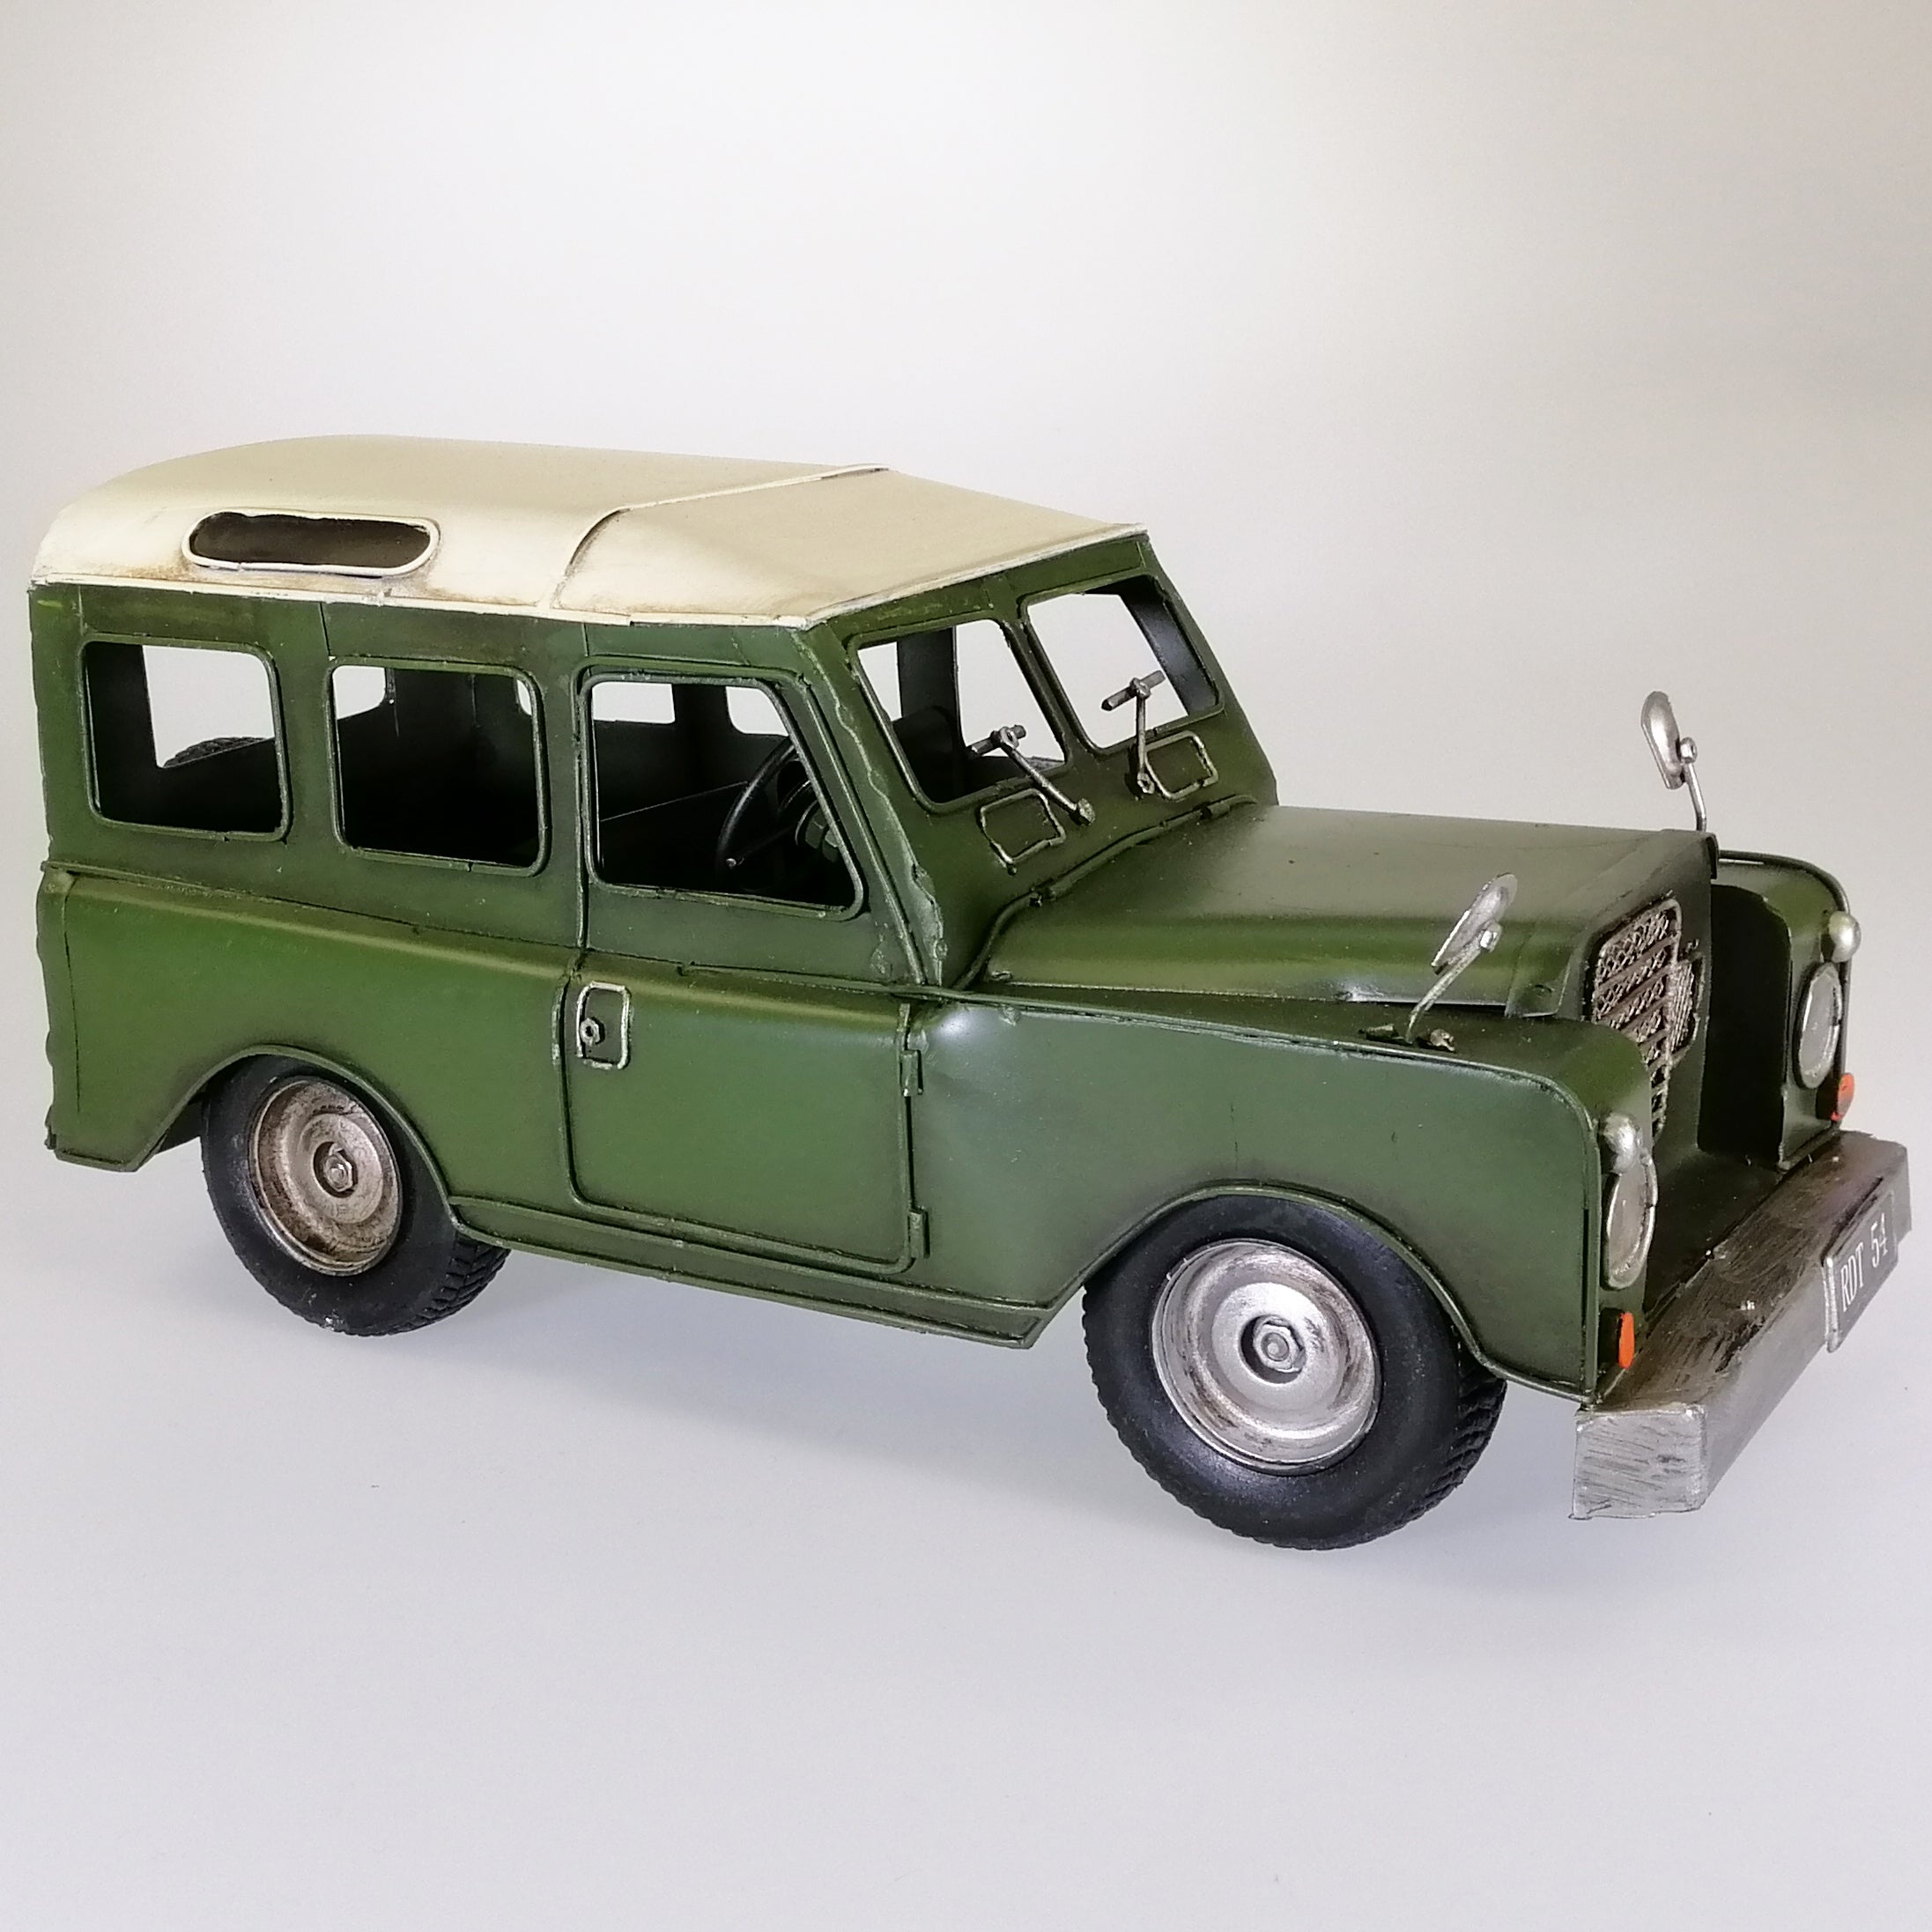 Early Model Land Rover Sculpture